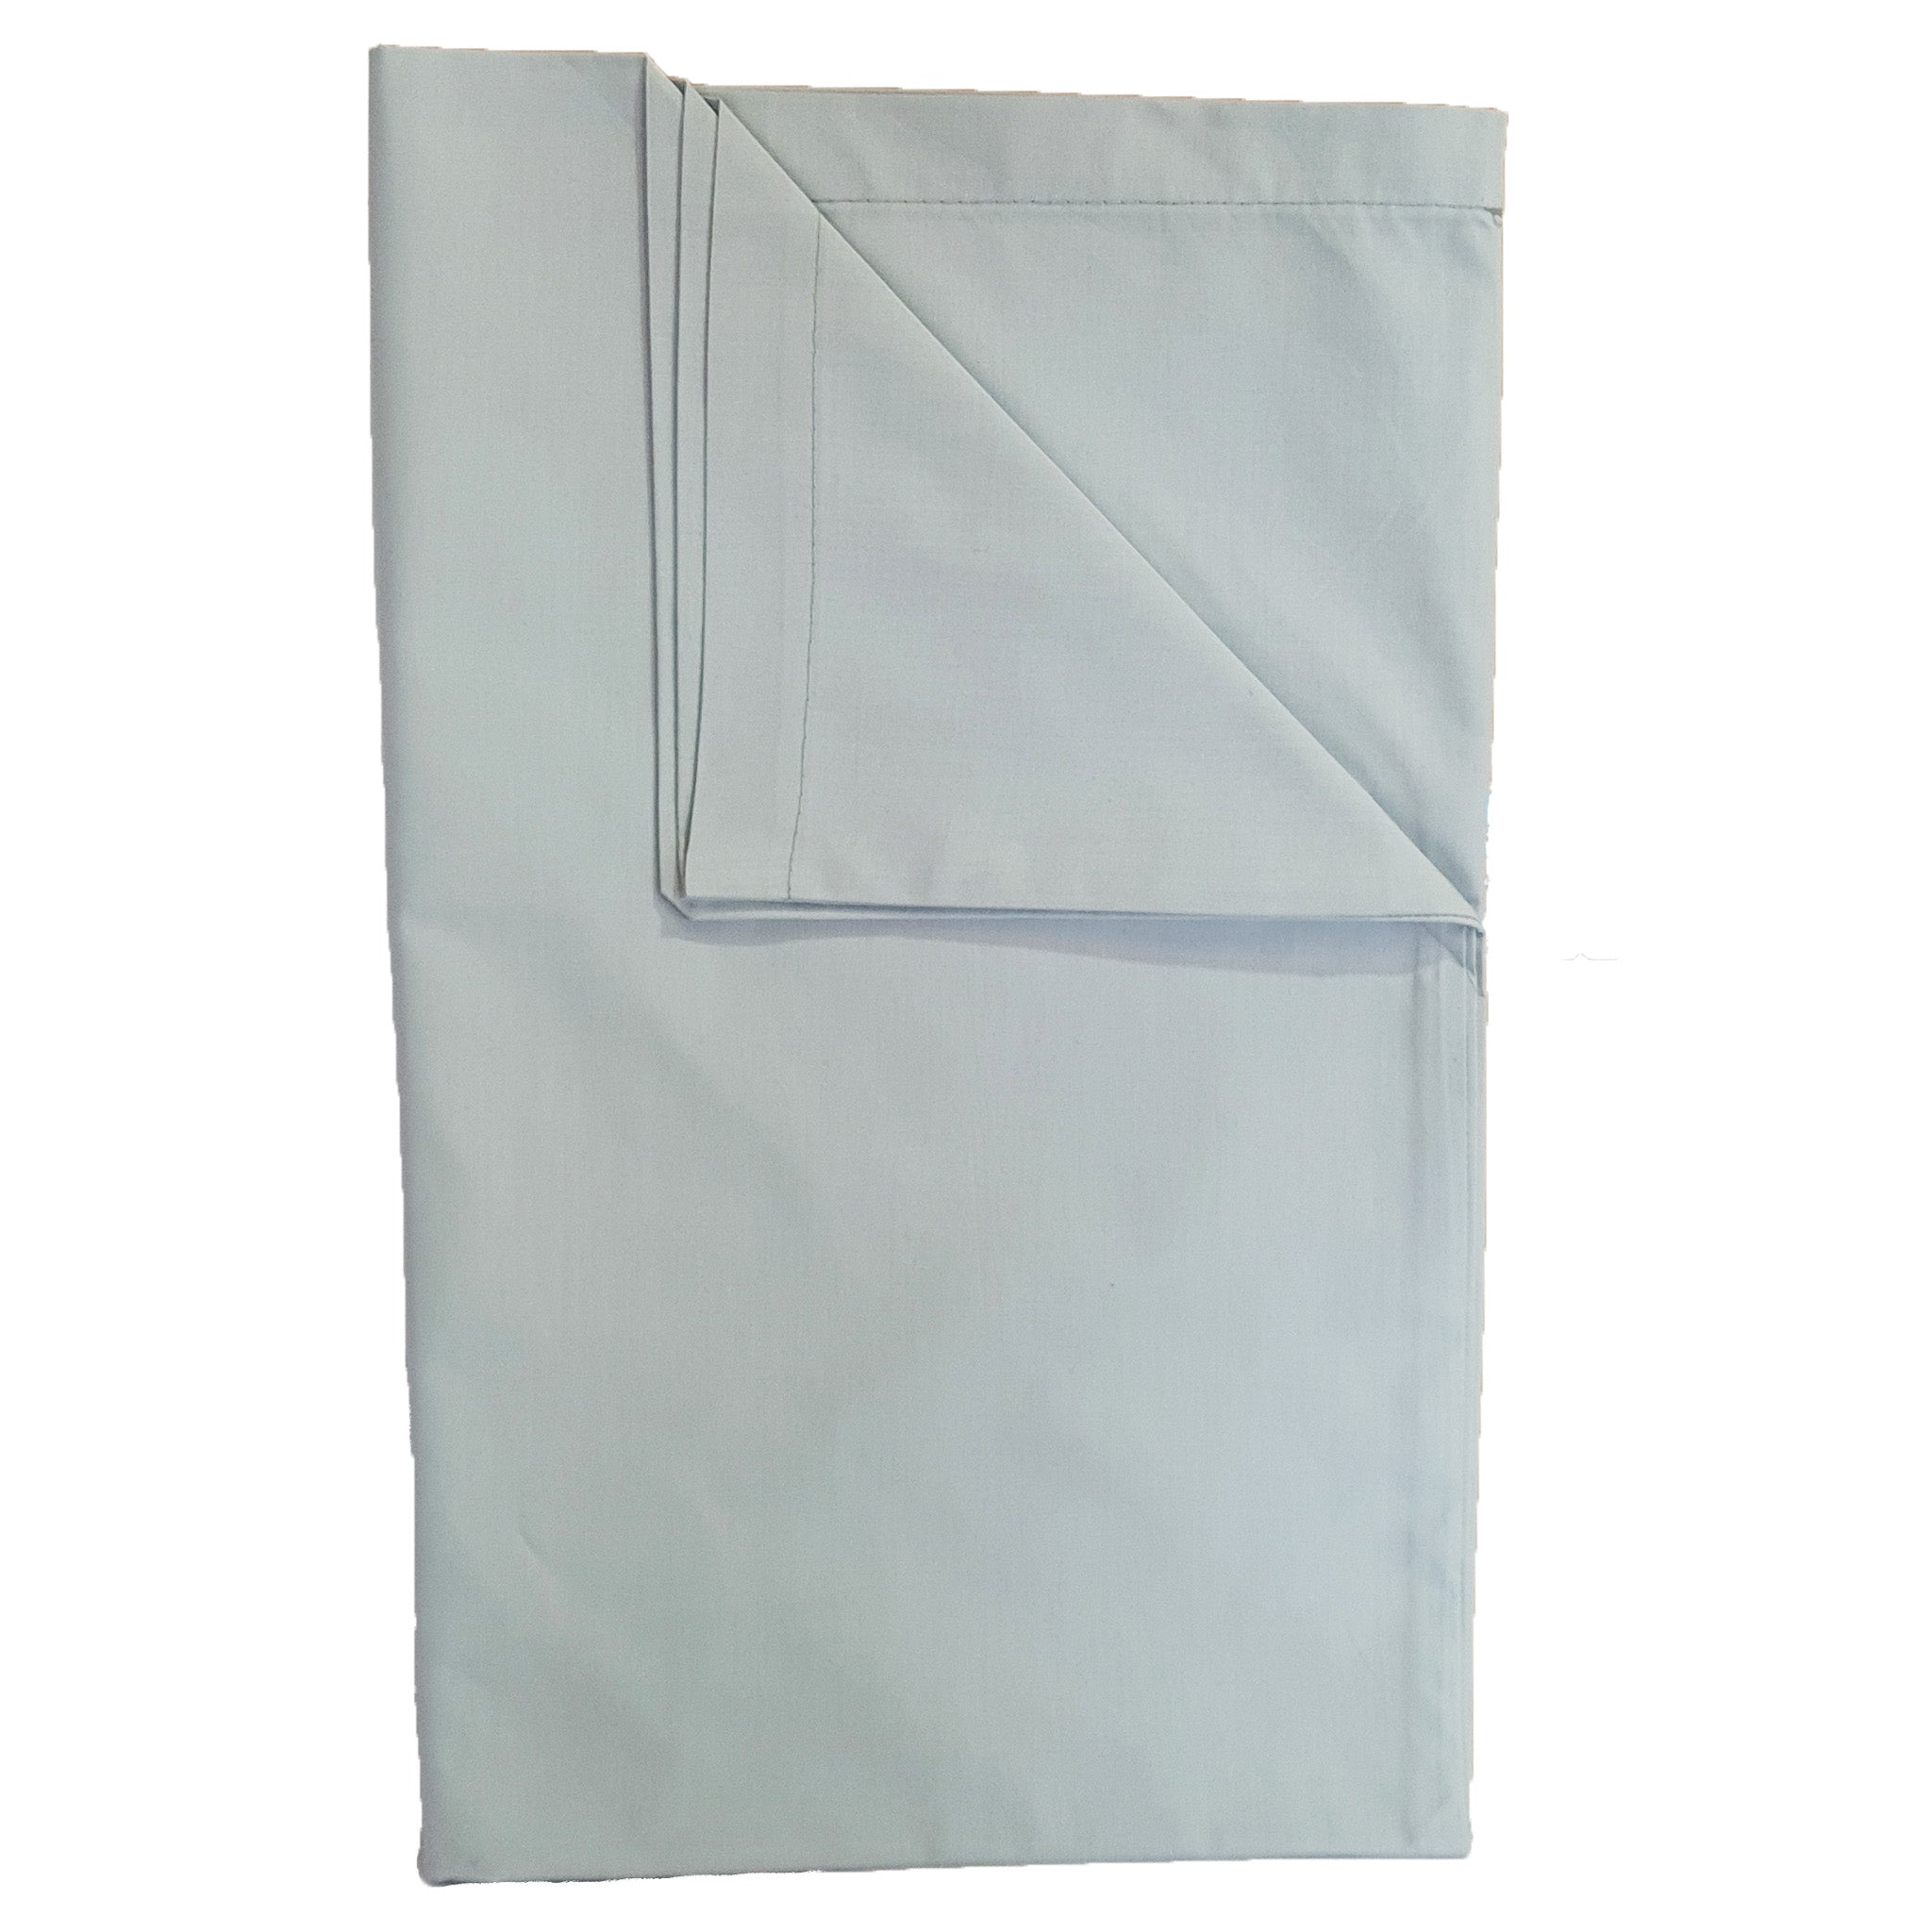 Fitted Sheet Standard Depth (30cm) - Cotton Percale